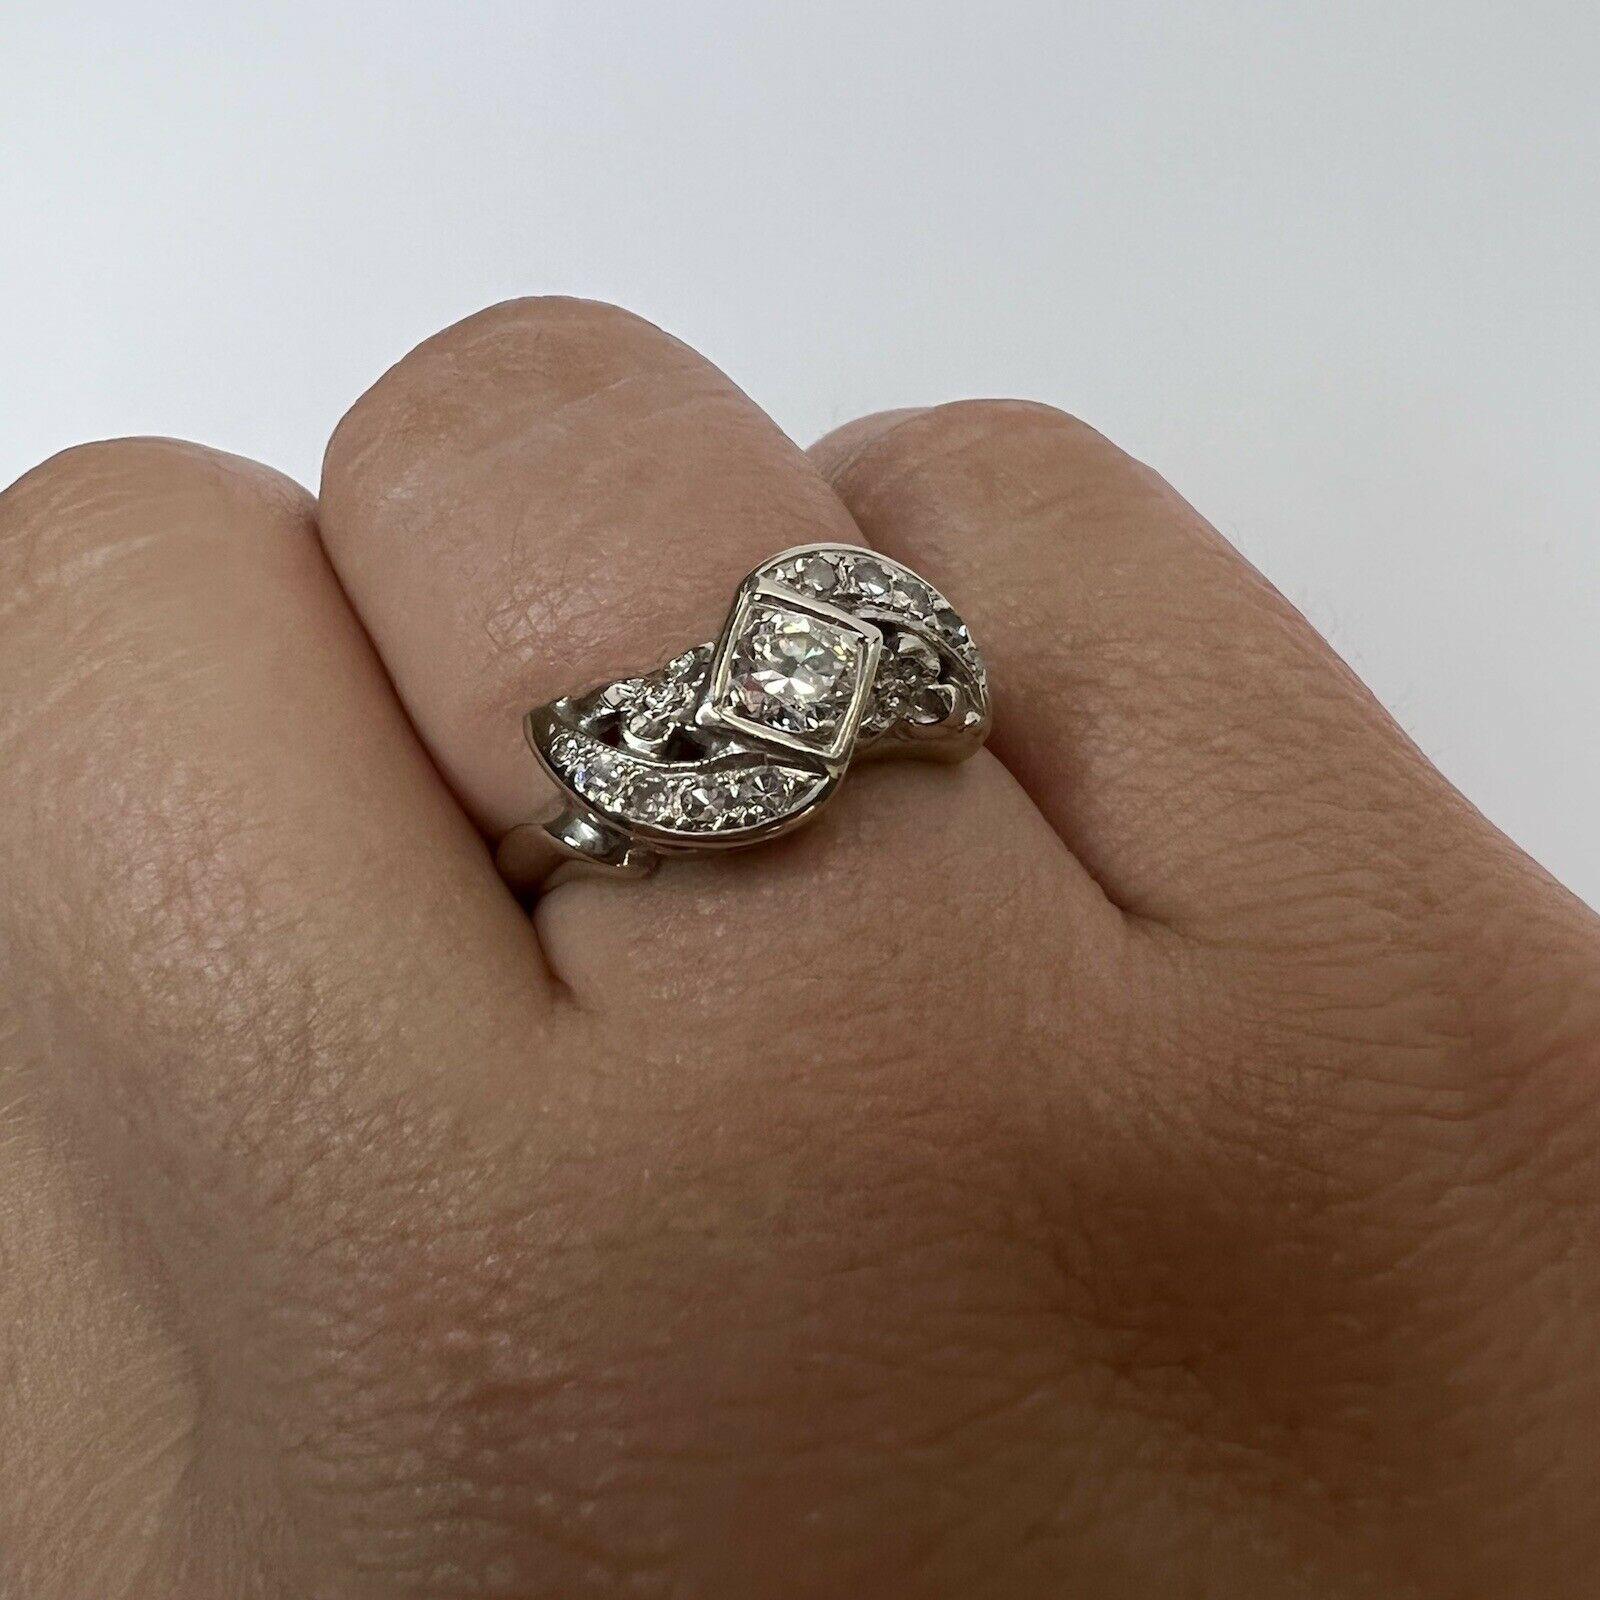 Solid 14k White Gold Swirl 0.60ctw Diamond Ring Band In Excellent Condition For Sale In Addison, TX